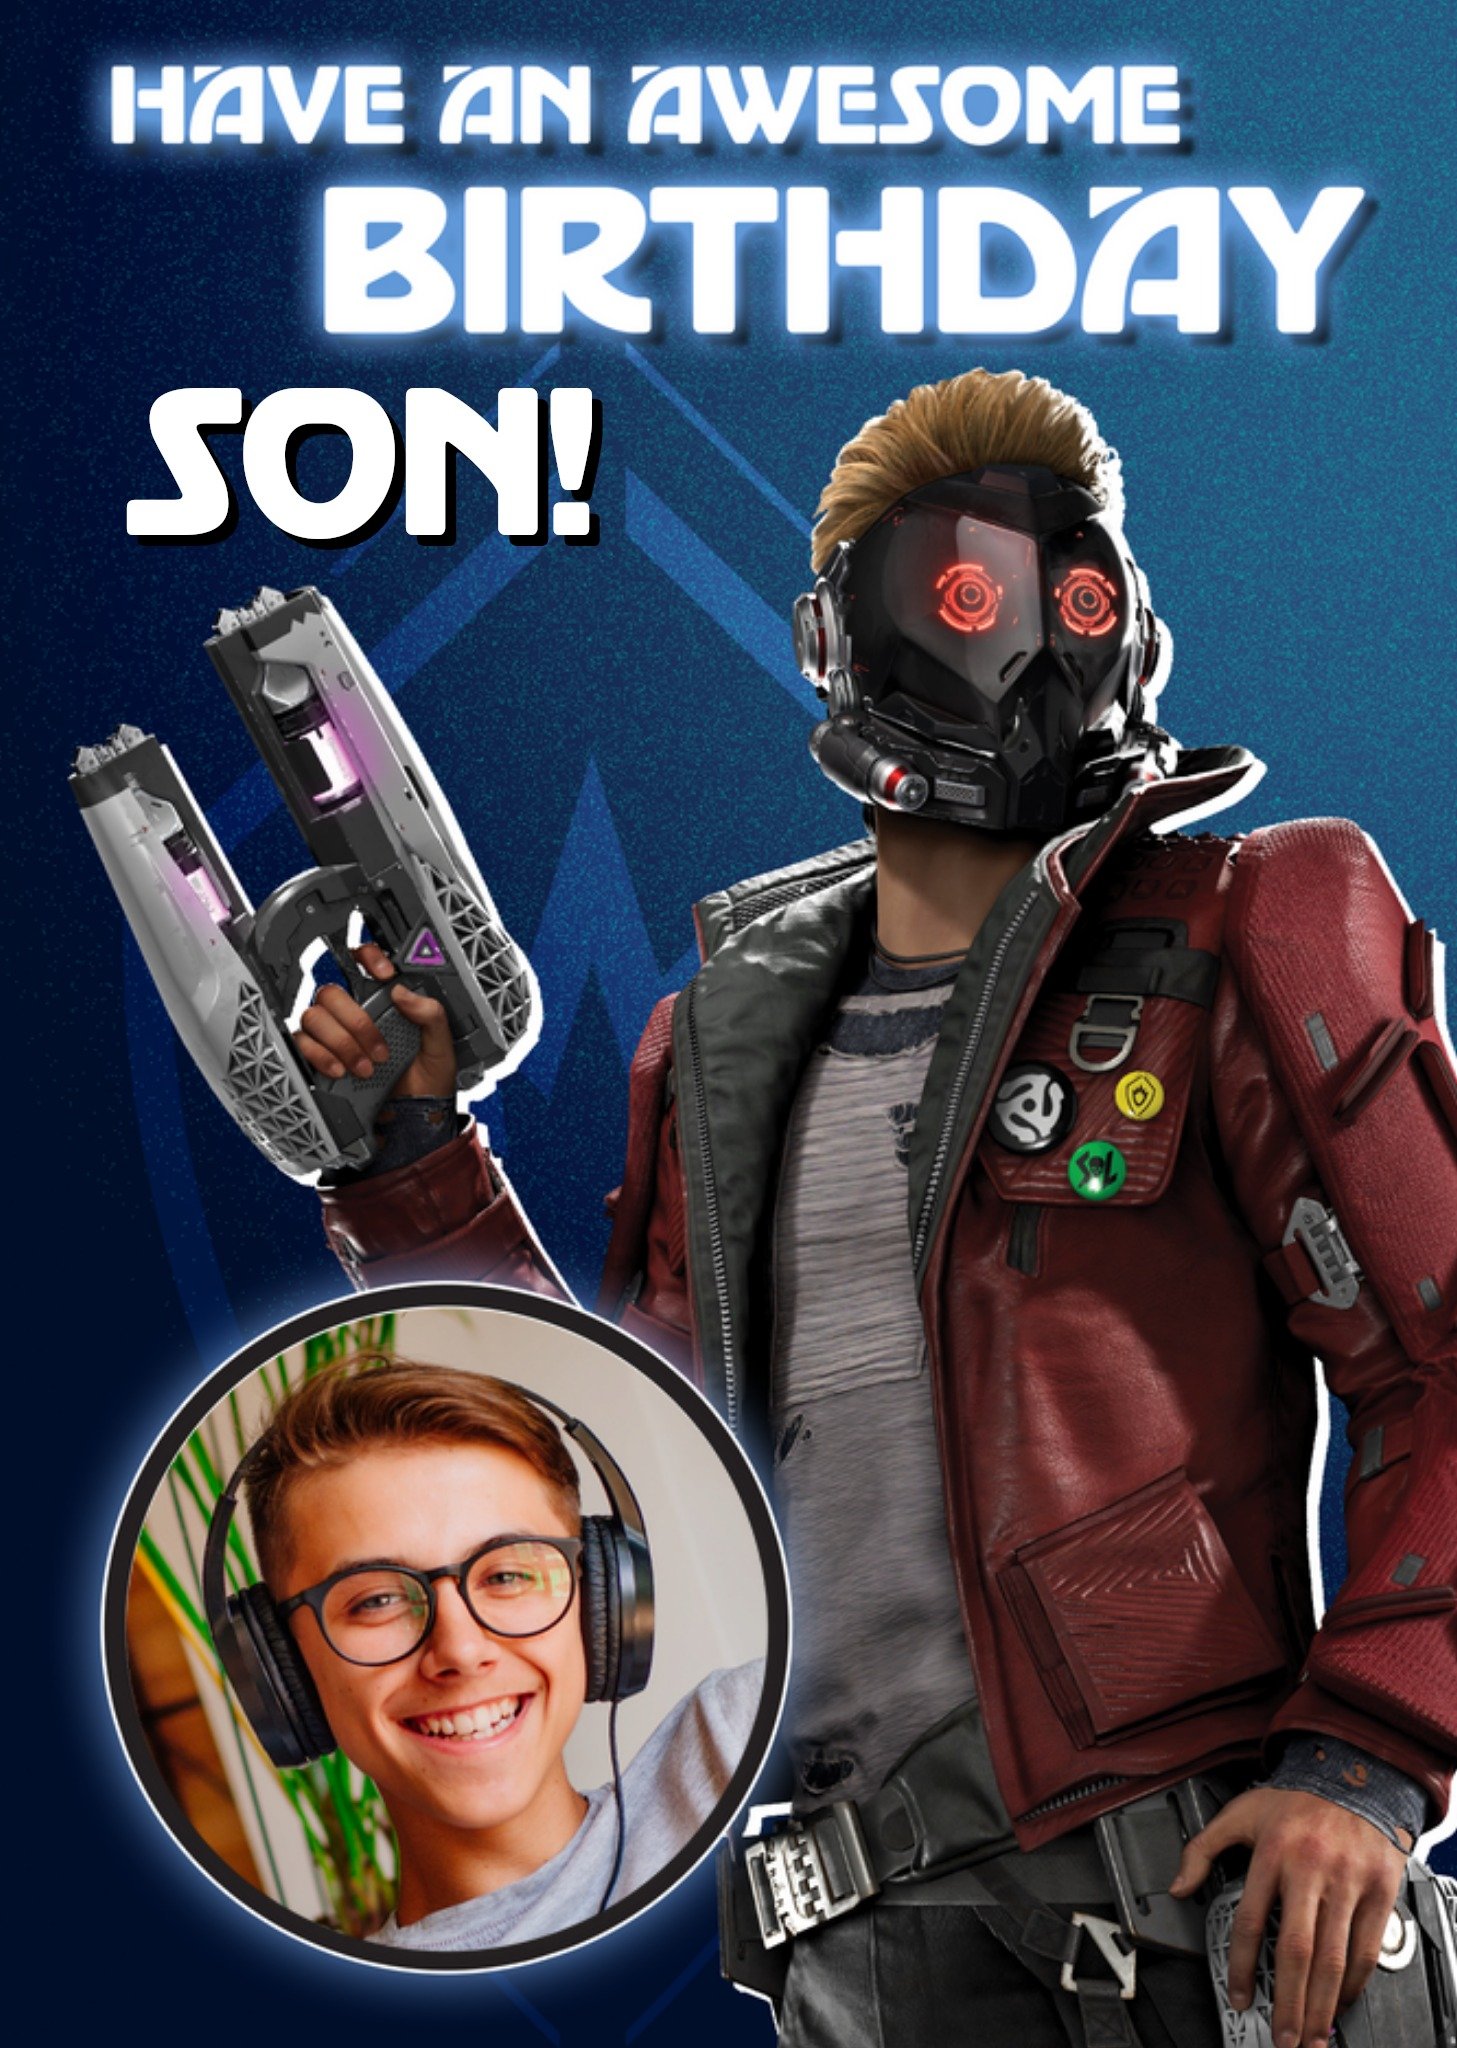 Marvel Guardians Of The Galaxy Awesome Birthday Son Photo Upload Birthday Card, Large